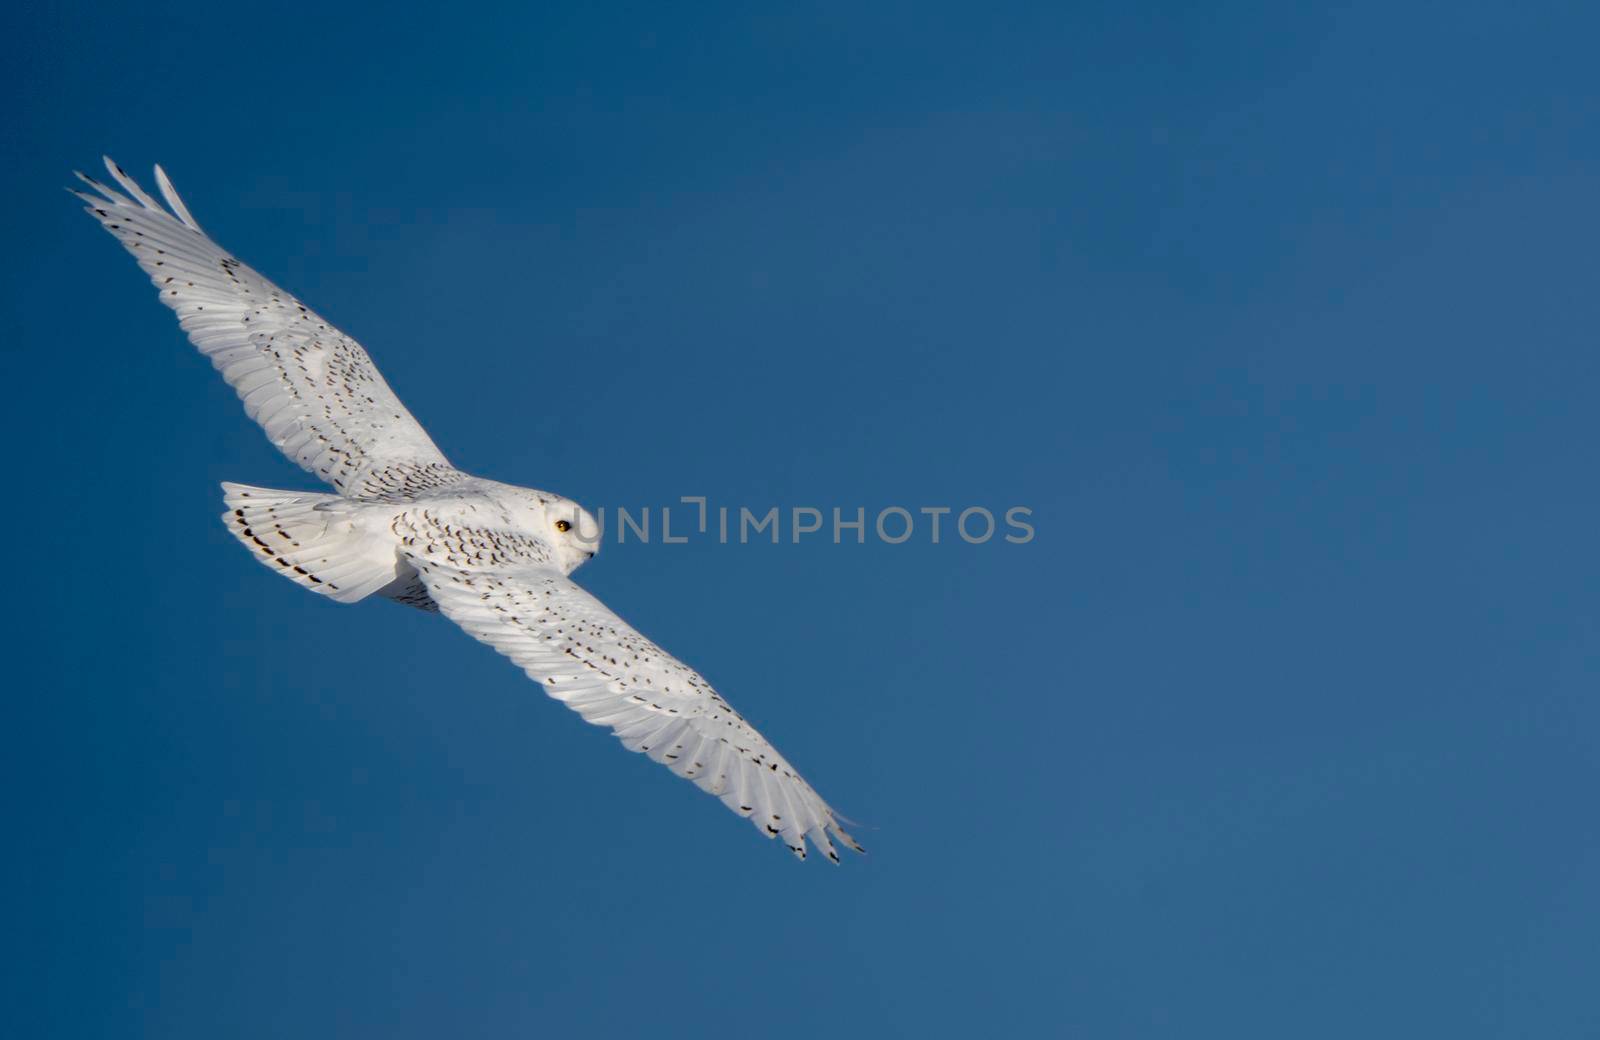 Snowy Owl Canada by pictureguy